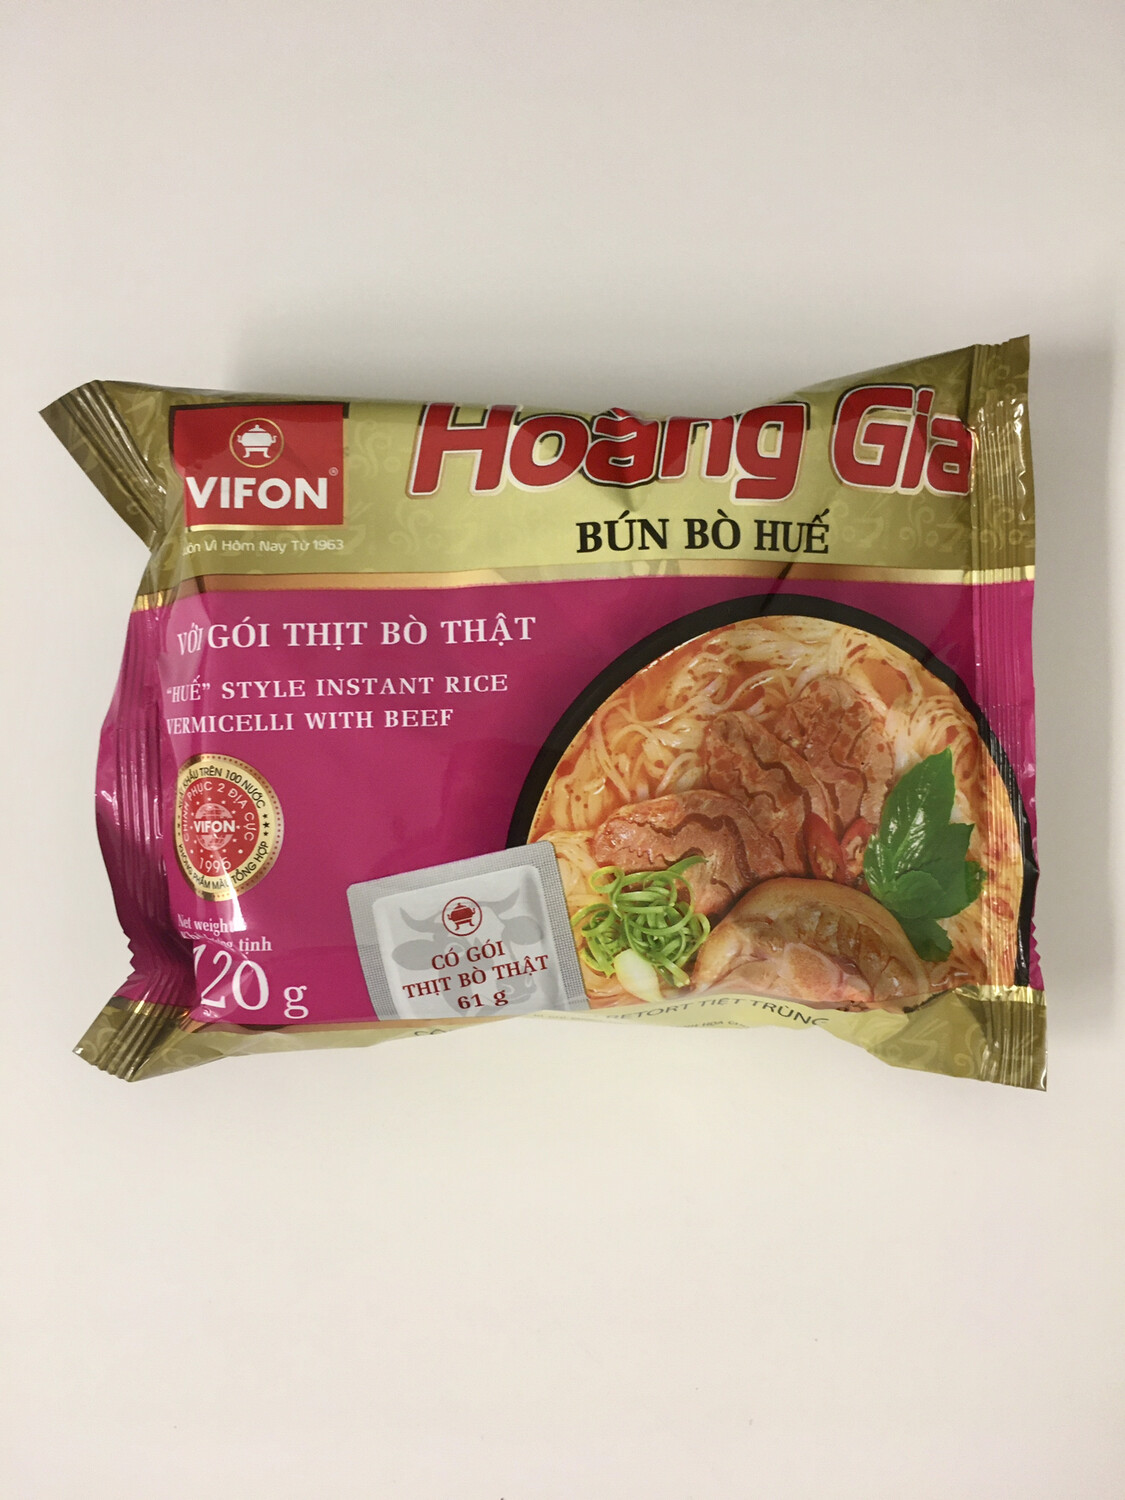 vifon-hoang-gia-hue-style-instant-rice-vermicelli-with-beef-bun-bo-hue